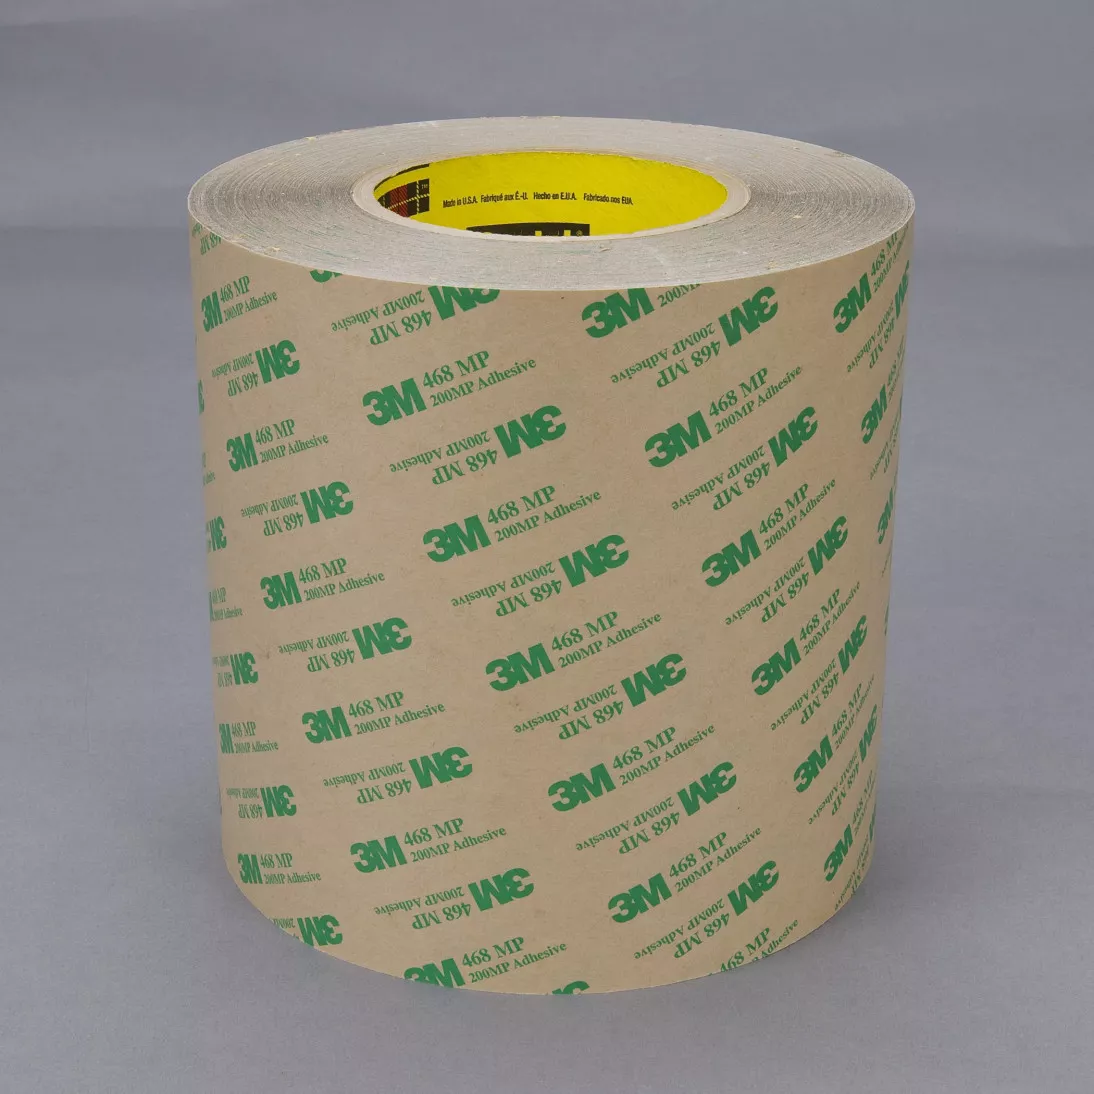 3M™ Adhesive Transfer Tape 468MP, Clear, 13 1/2 in x 180 yd, 5 mil, 1
roll per case